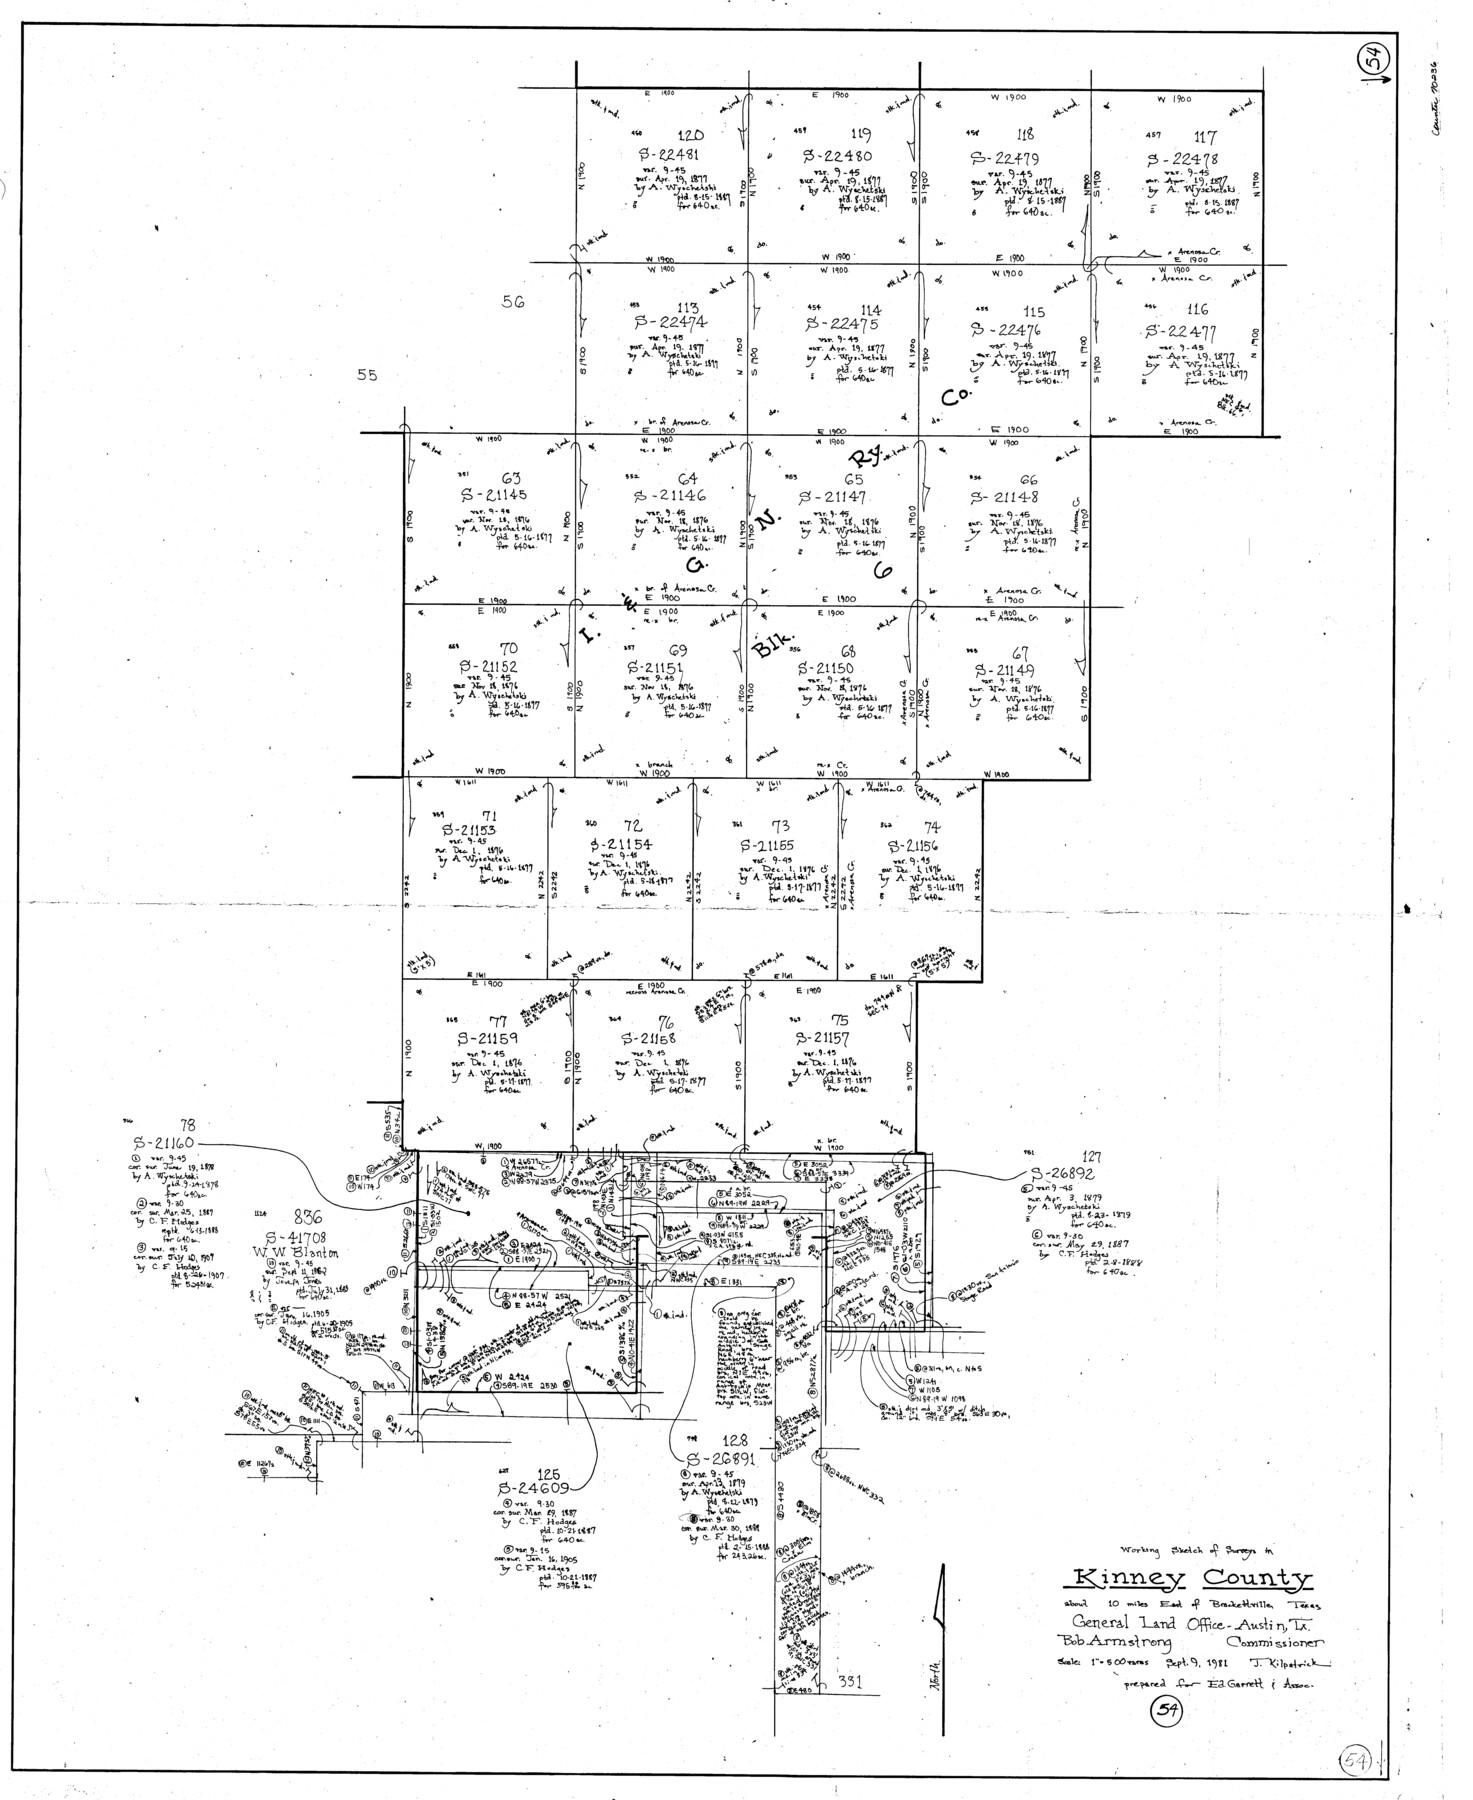 70236, Kinney County Working Sketch 54, General Map Collection